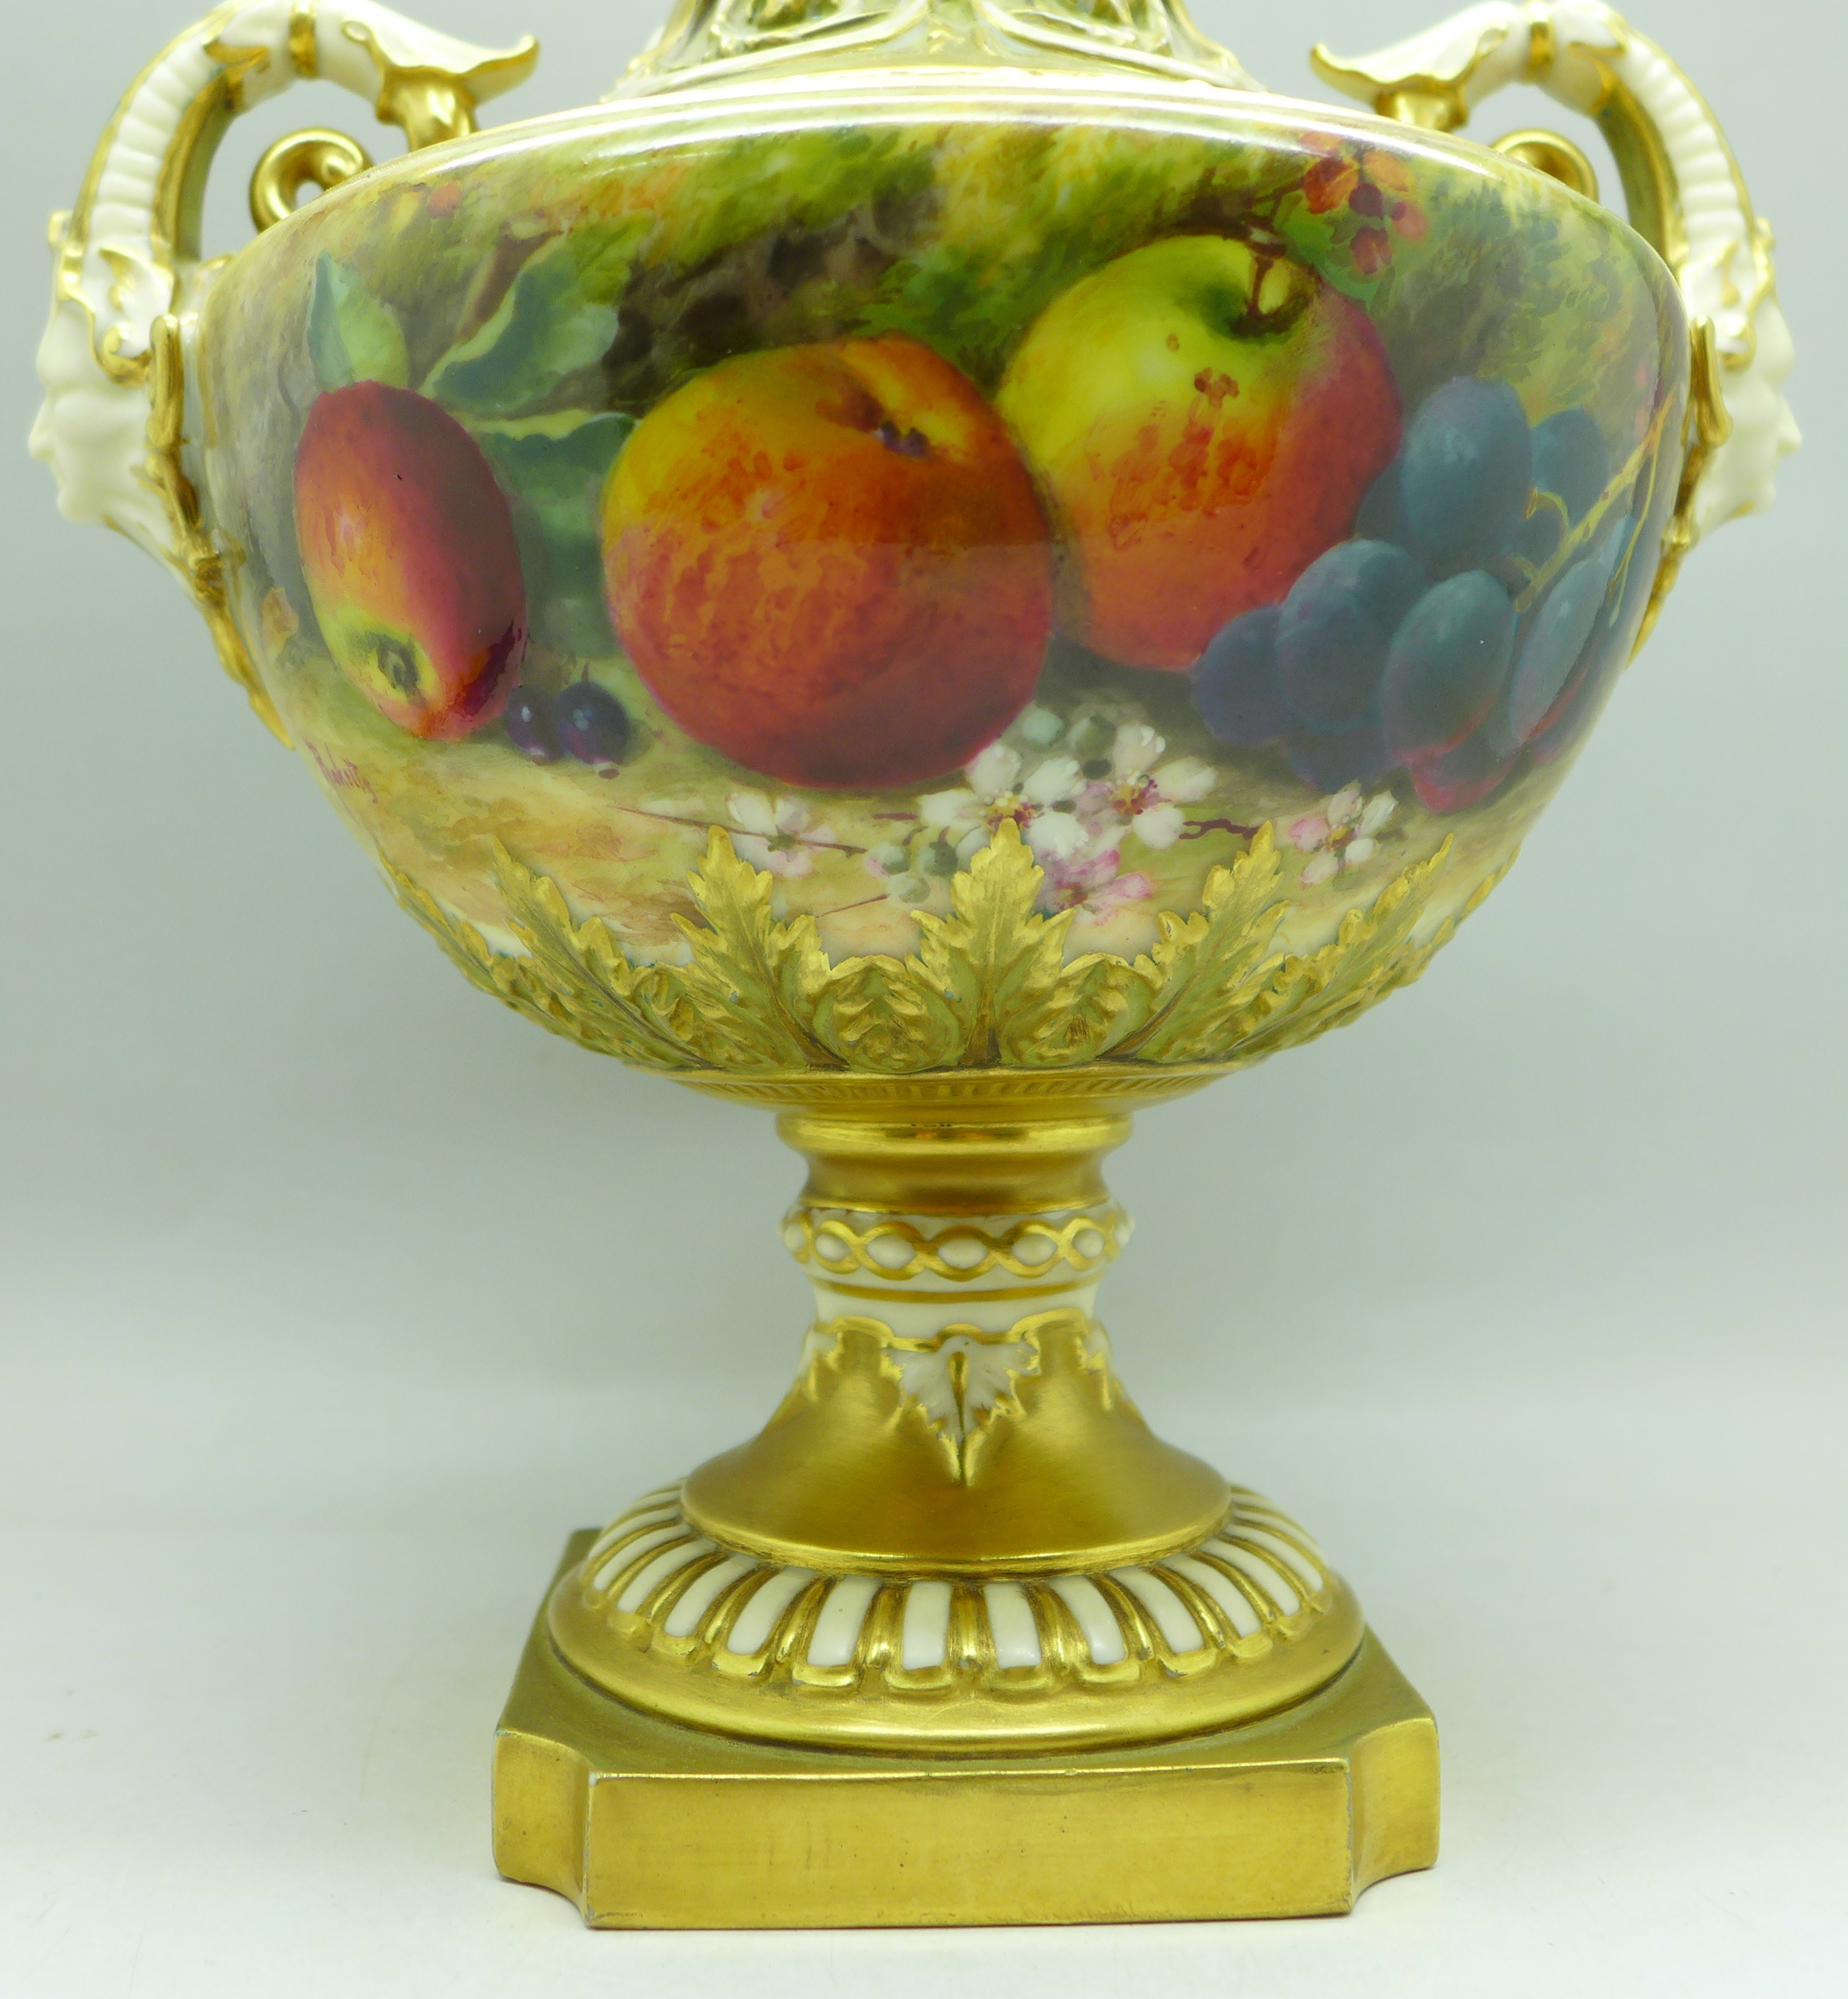 A 1925 Royal Worcester hand decorated lidded vase, 1572, signed (William) Ricketts, finial on lid - Image 2 of 11